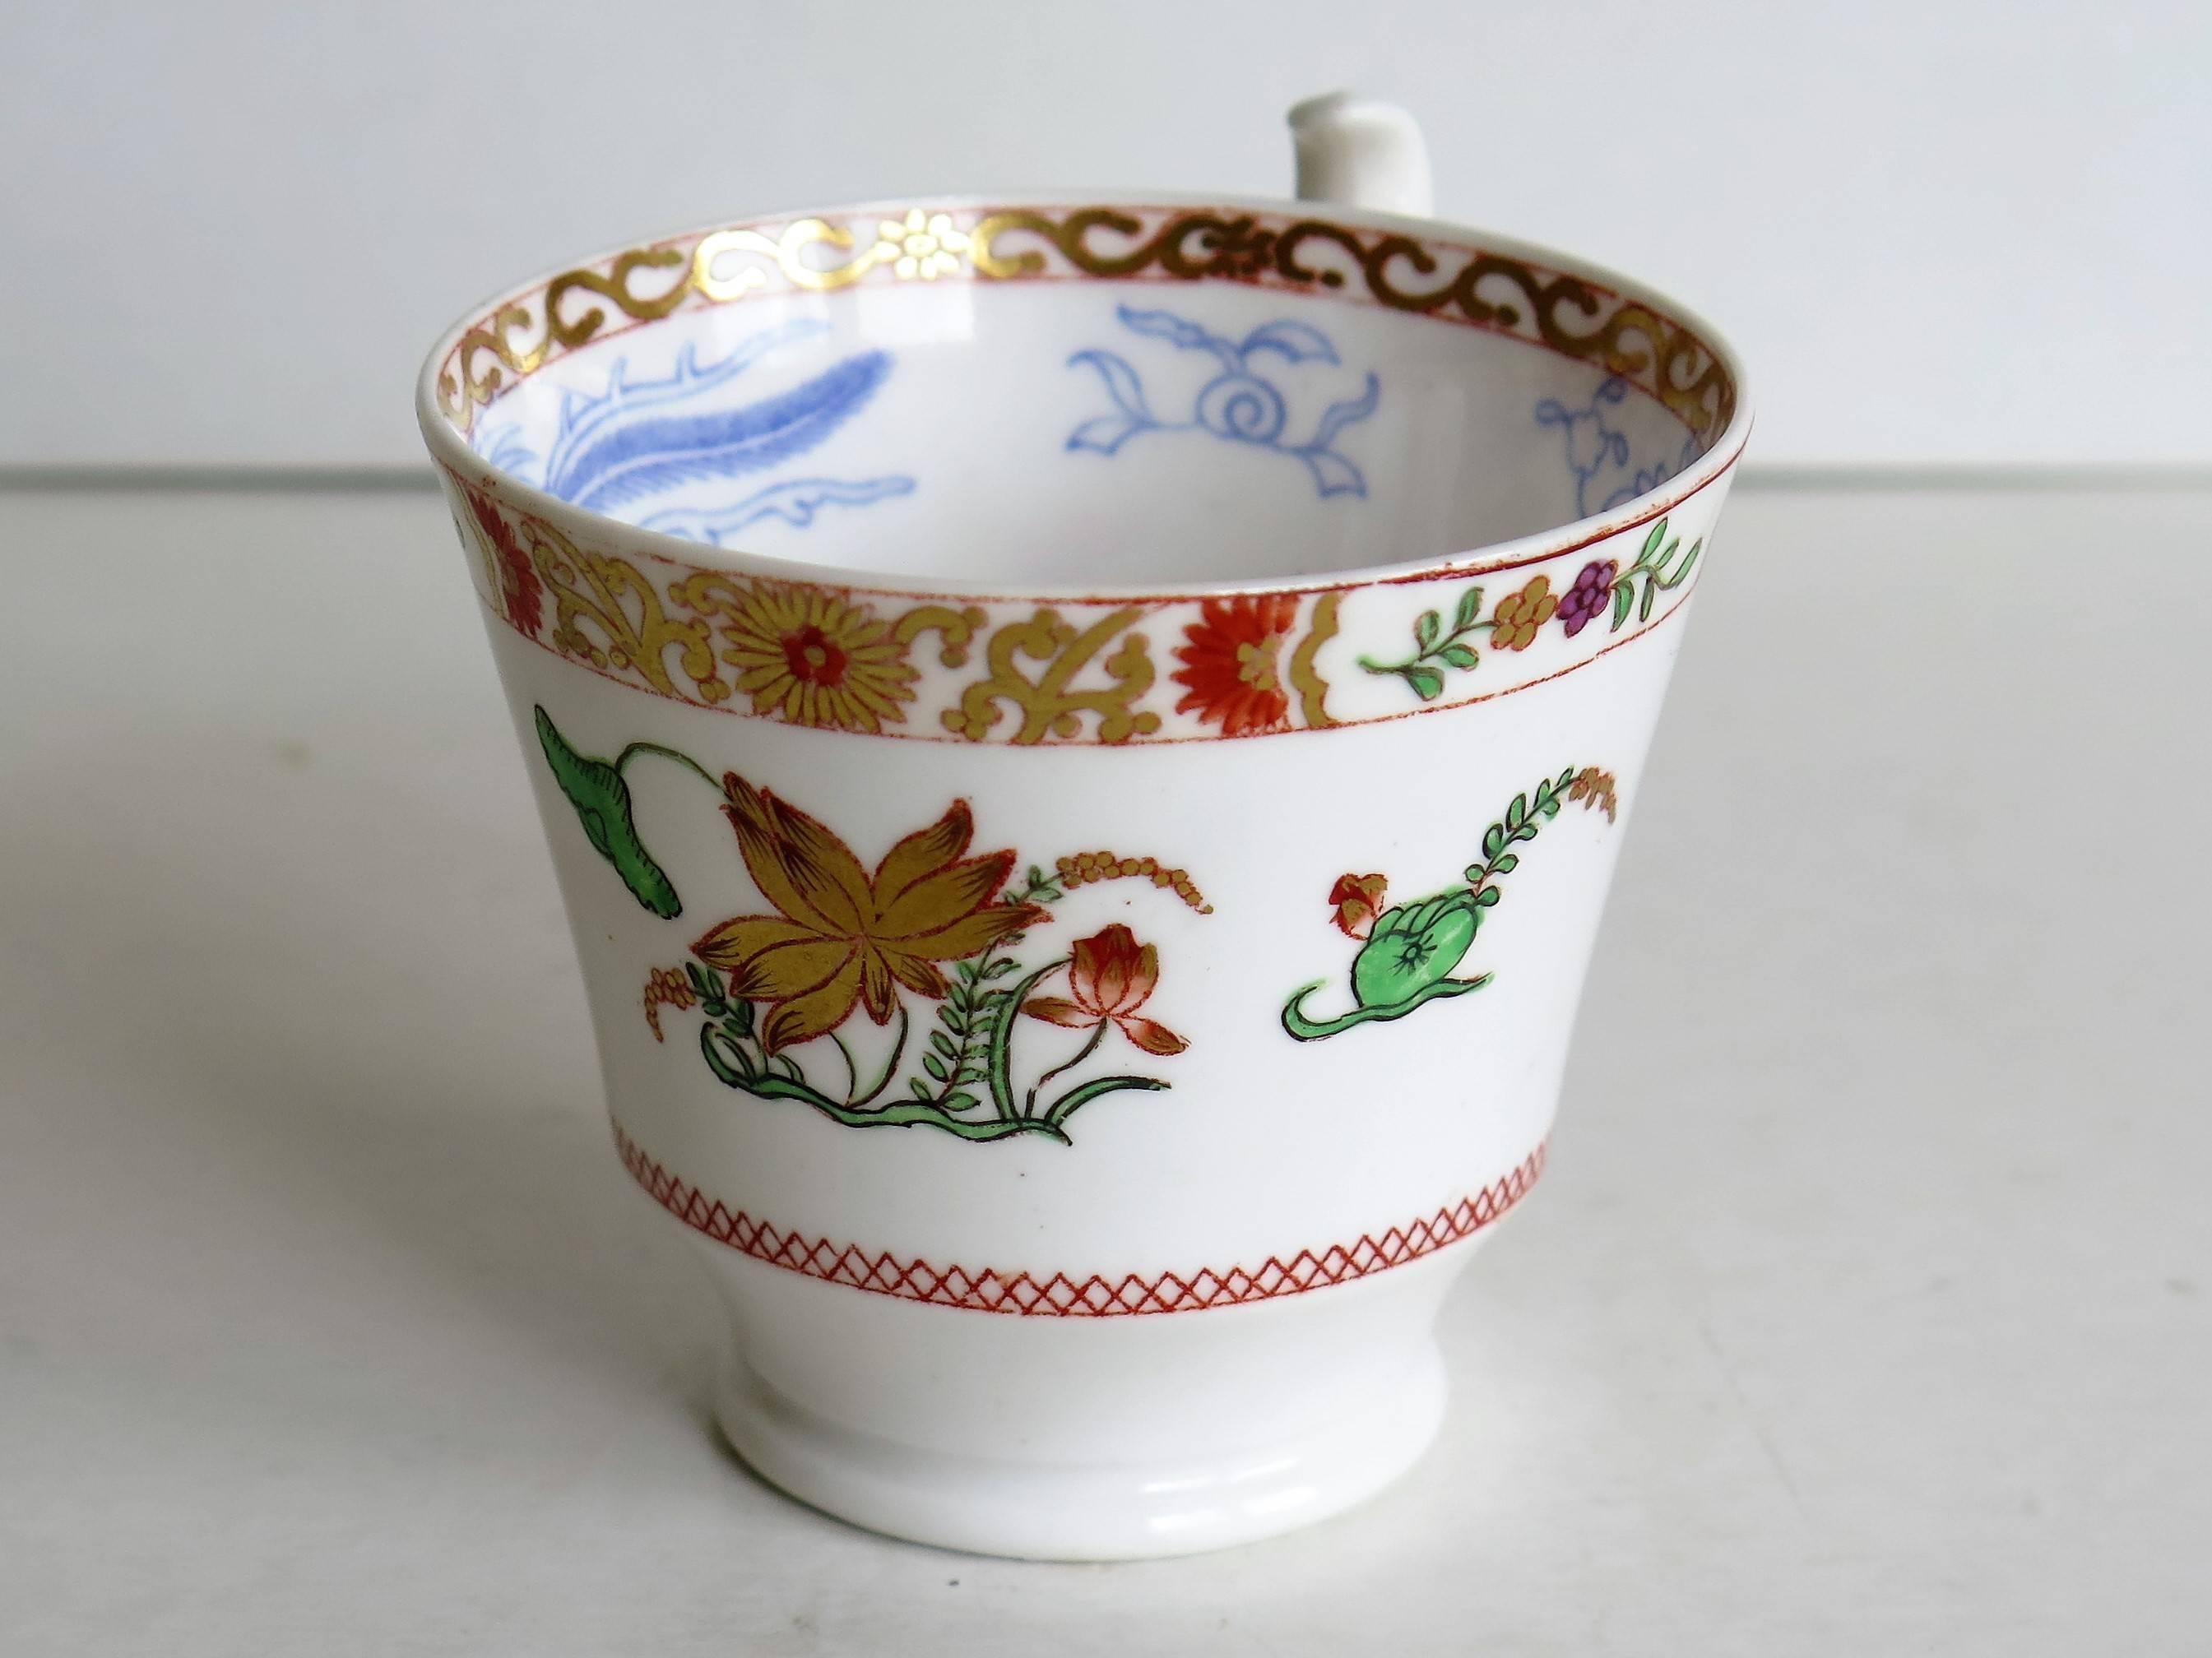 19th Century Early 19th C Spode Cup and Saucer Porcelain Chinoiserie Pattern 2638, Circa 1815